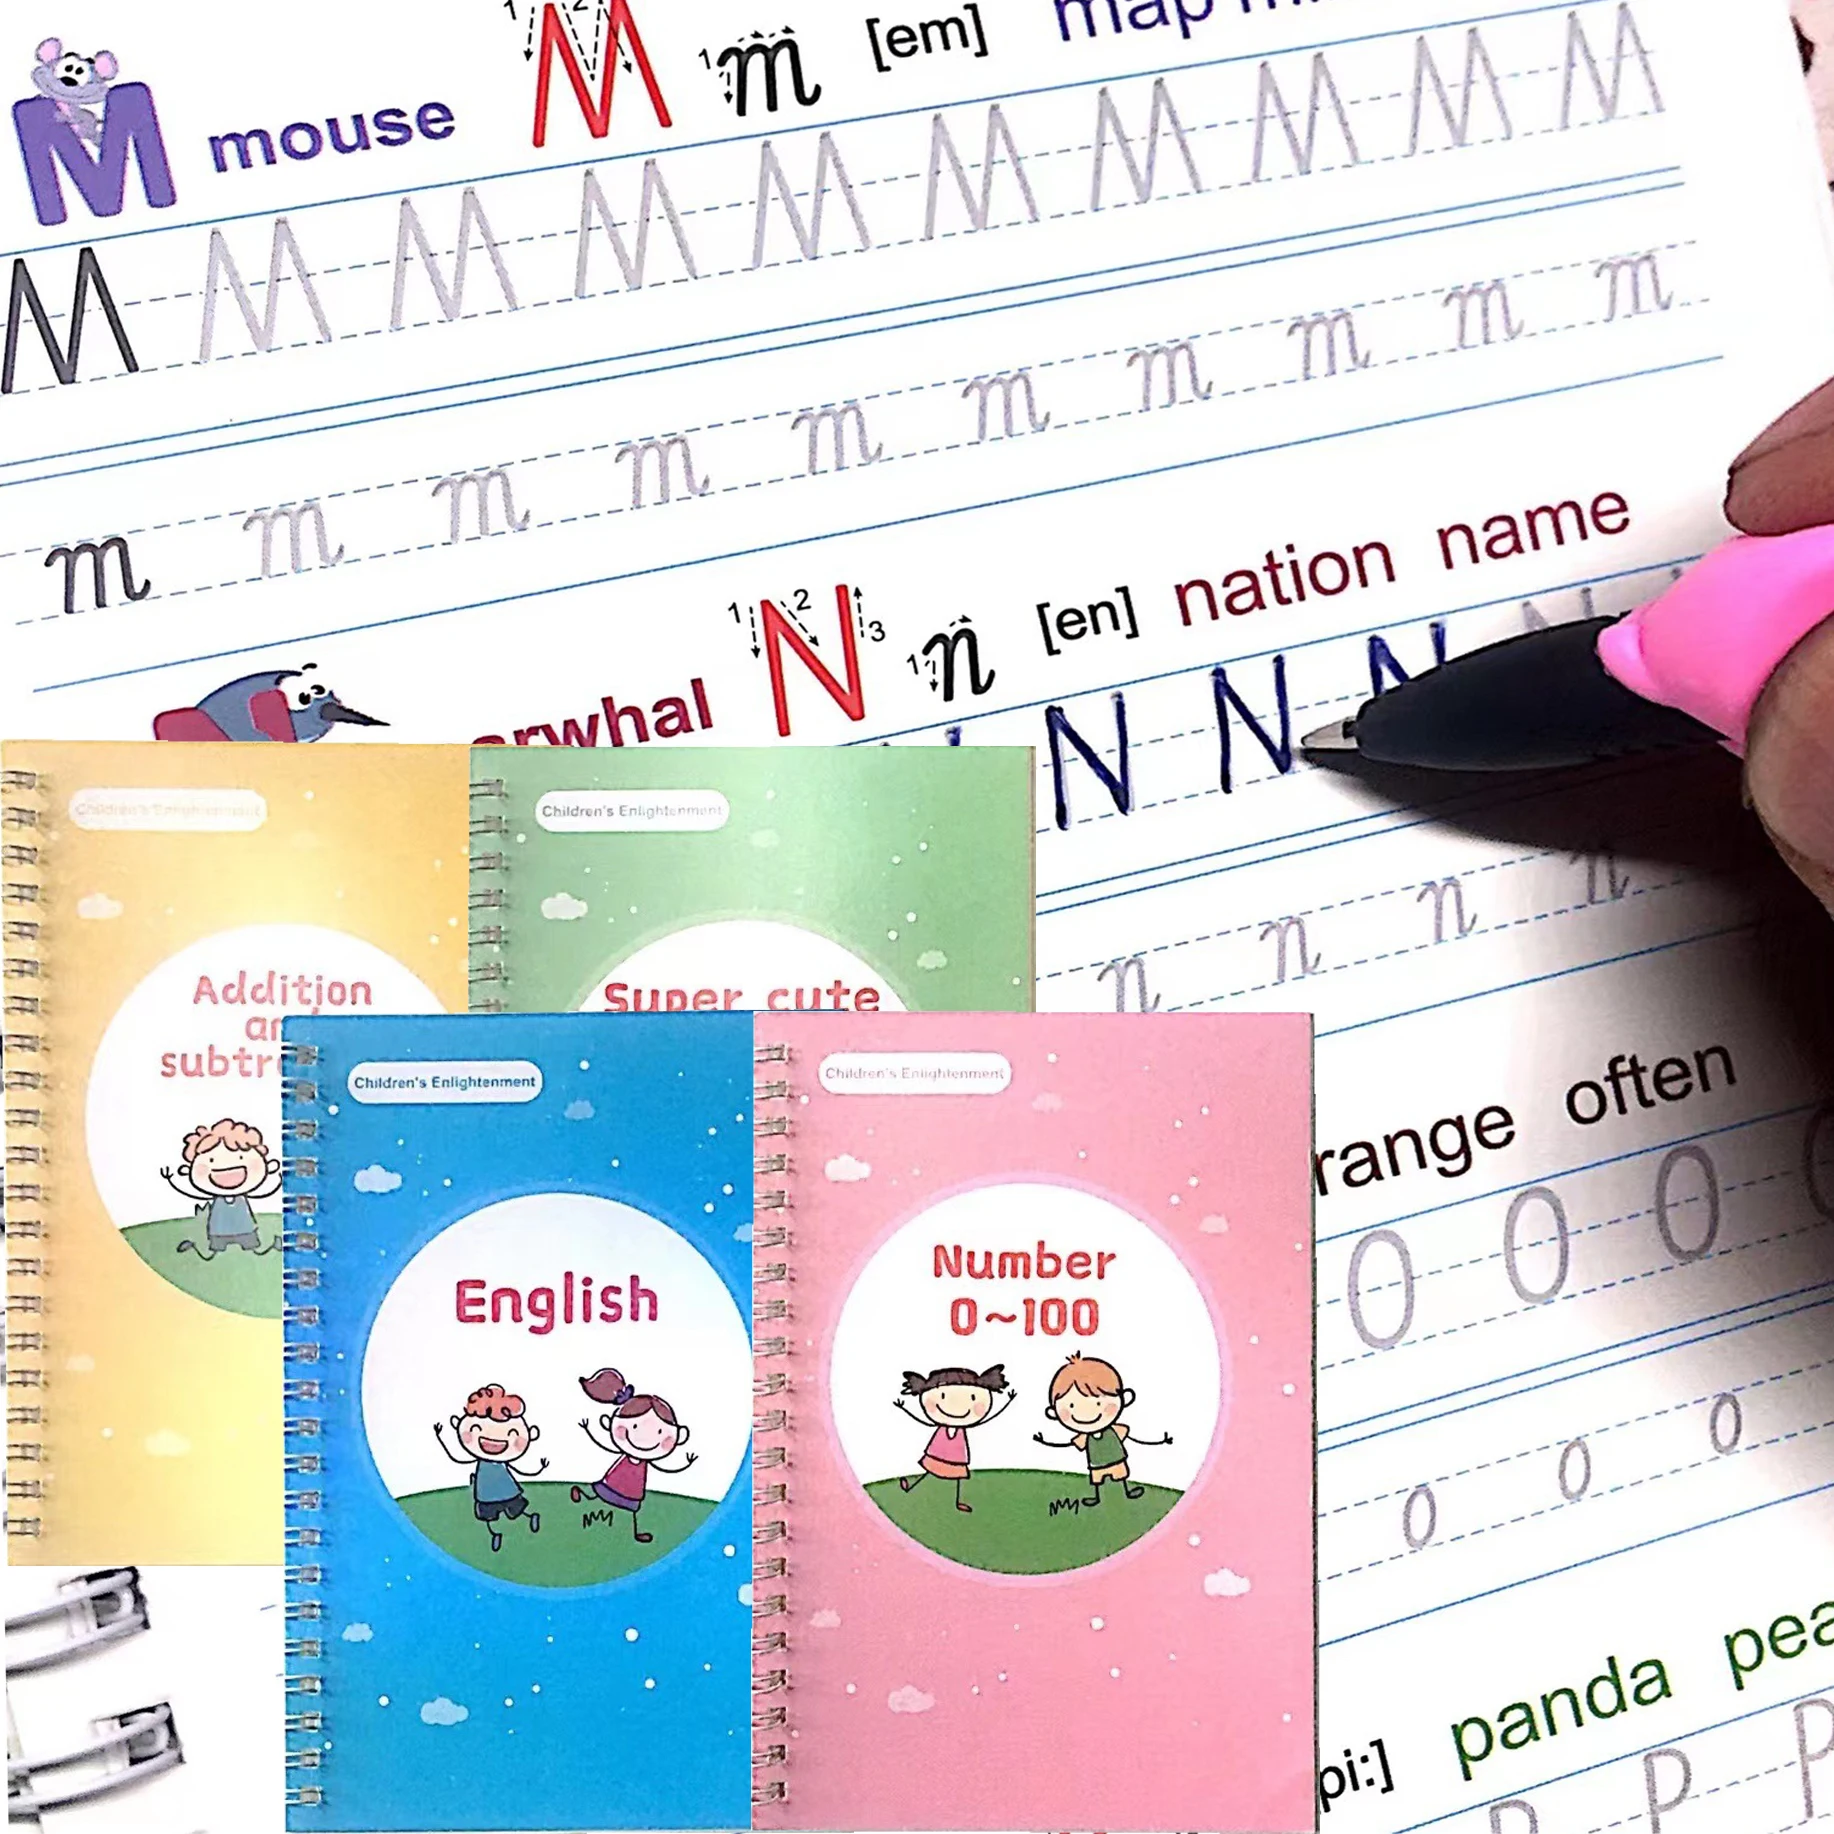 English Groove Magic Practice Copybook Children's Book Learning Numbers  Letters Alphabet Calligraphy Writing Exercise Books Gift - AliExpress